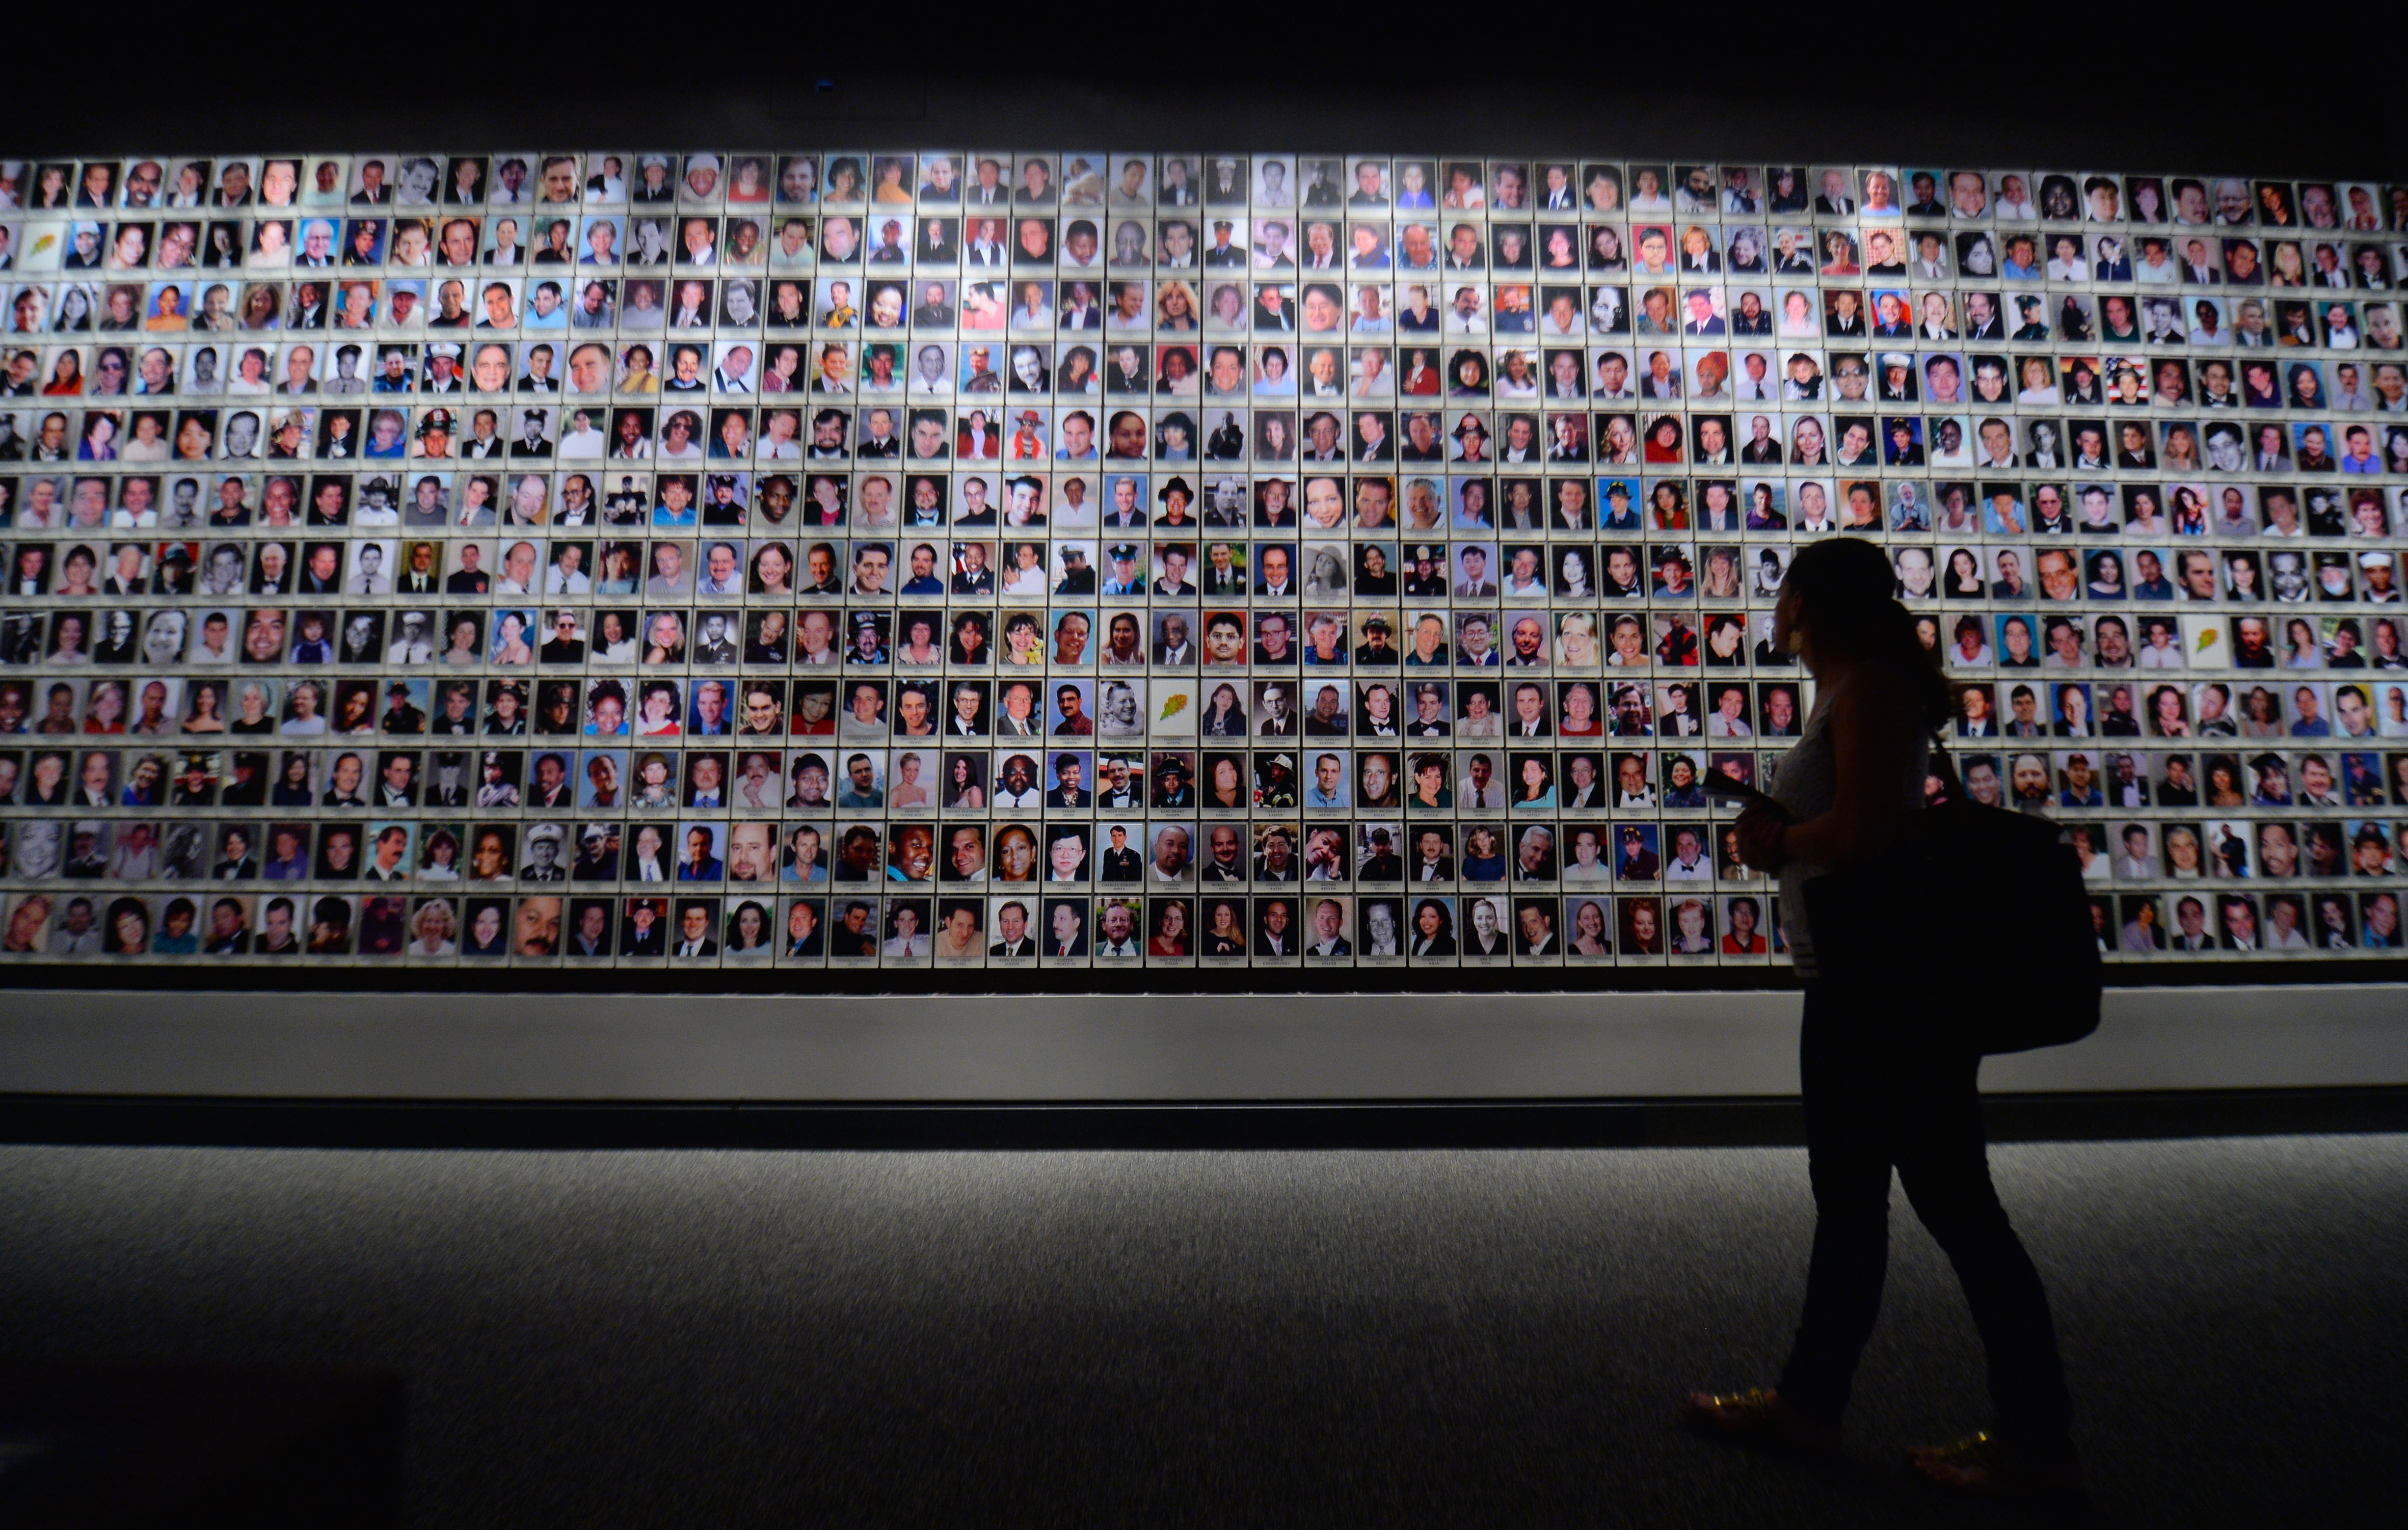 People visit the National 9/11 Memorial Museum in New York City on May 25, 2014. (Cem Ozdel—Anadolu Agency/Getty Images)